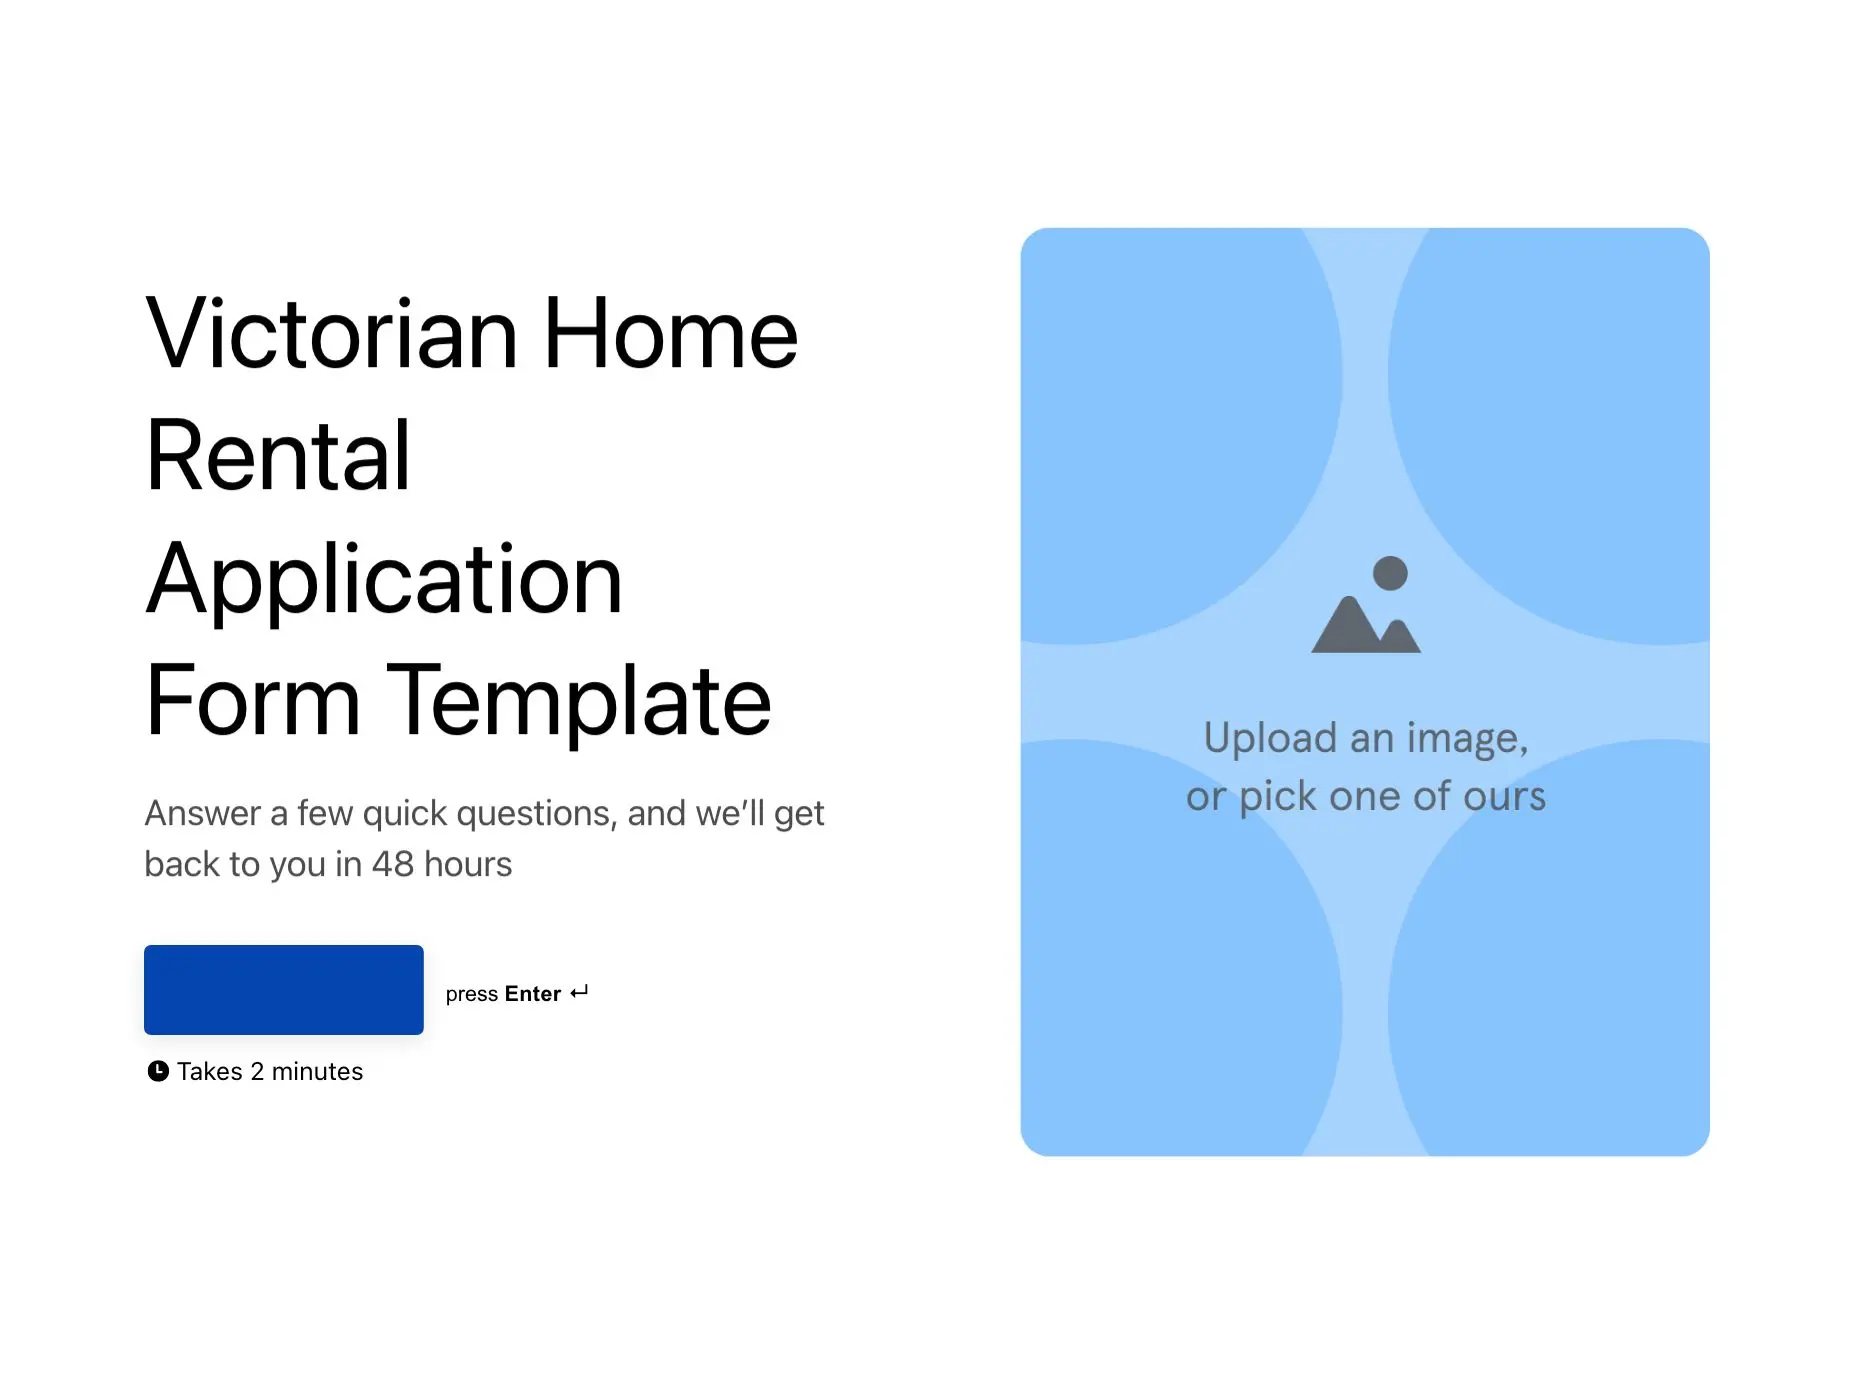 Victorian Home Rental Application Form Template Hero